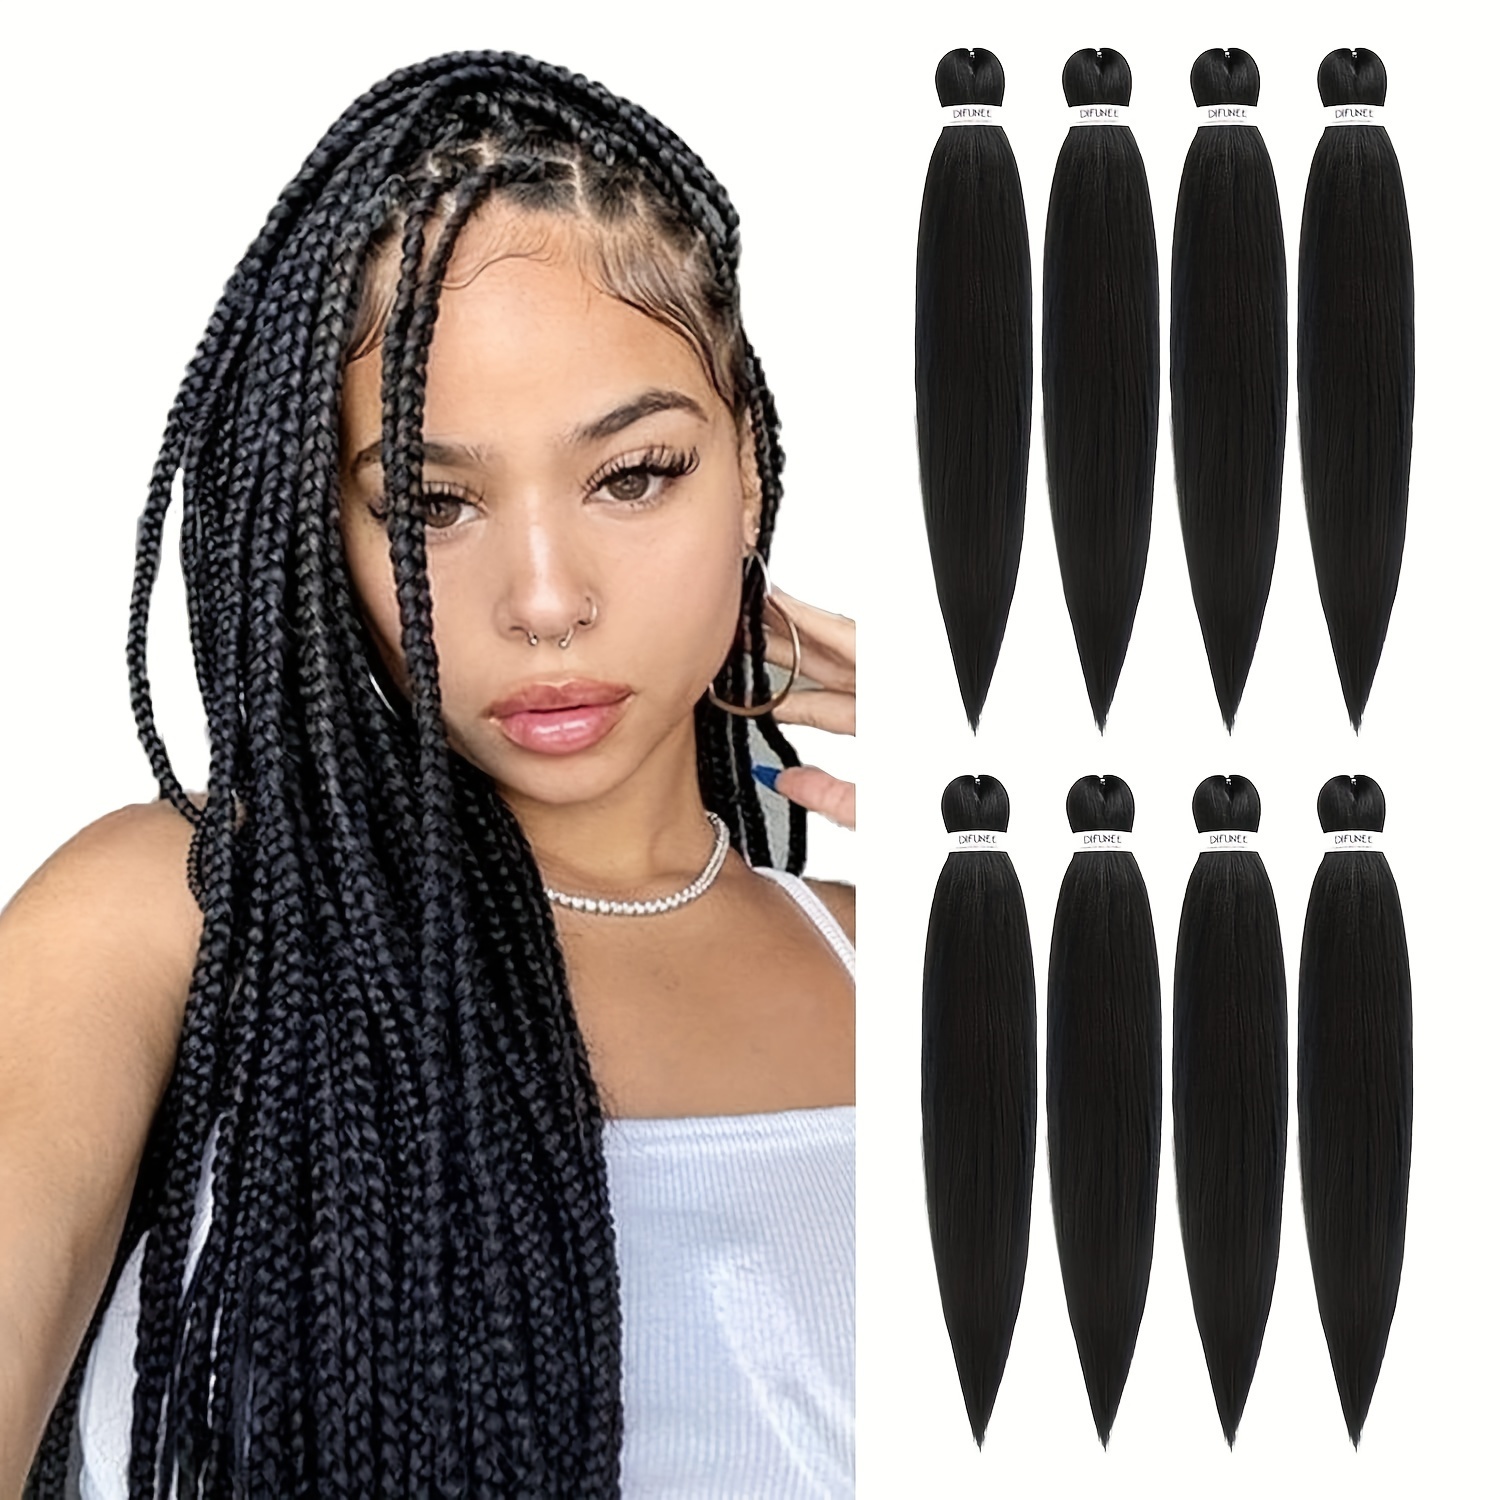 Pre-Stretched Braiding Hair - 30 Inch Natural Hair Extension Braiding Hair  Pre-Stretched Professional Synthetic Fiber Crochet Hair Hot Water Setting